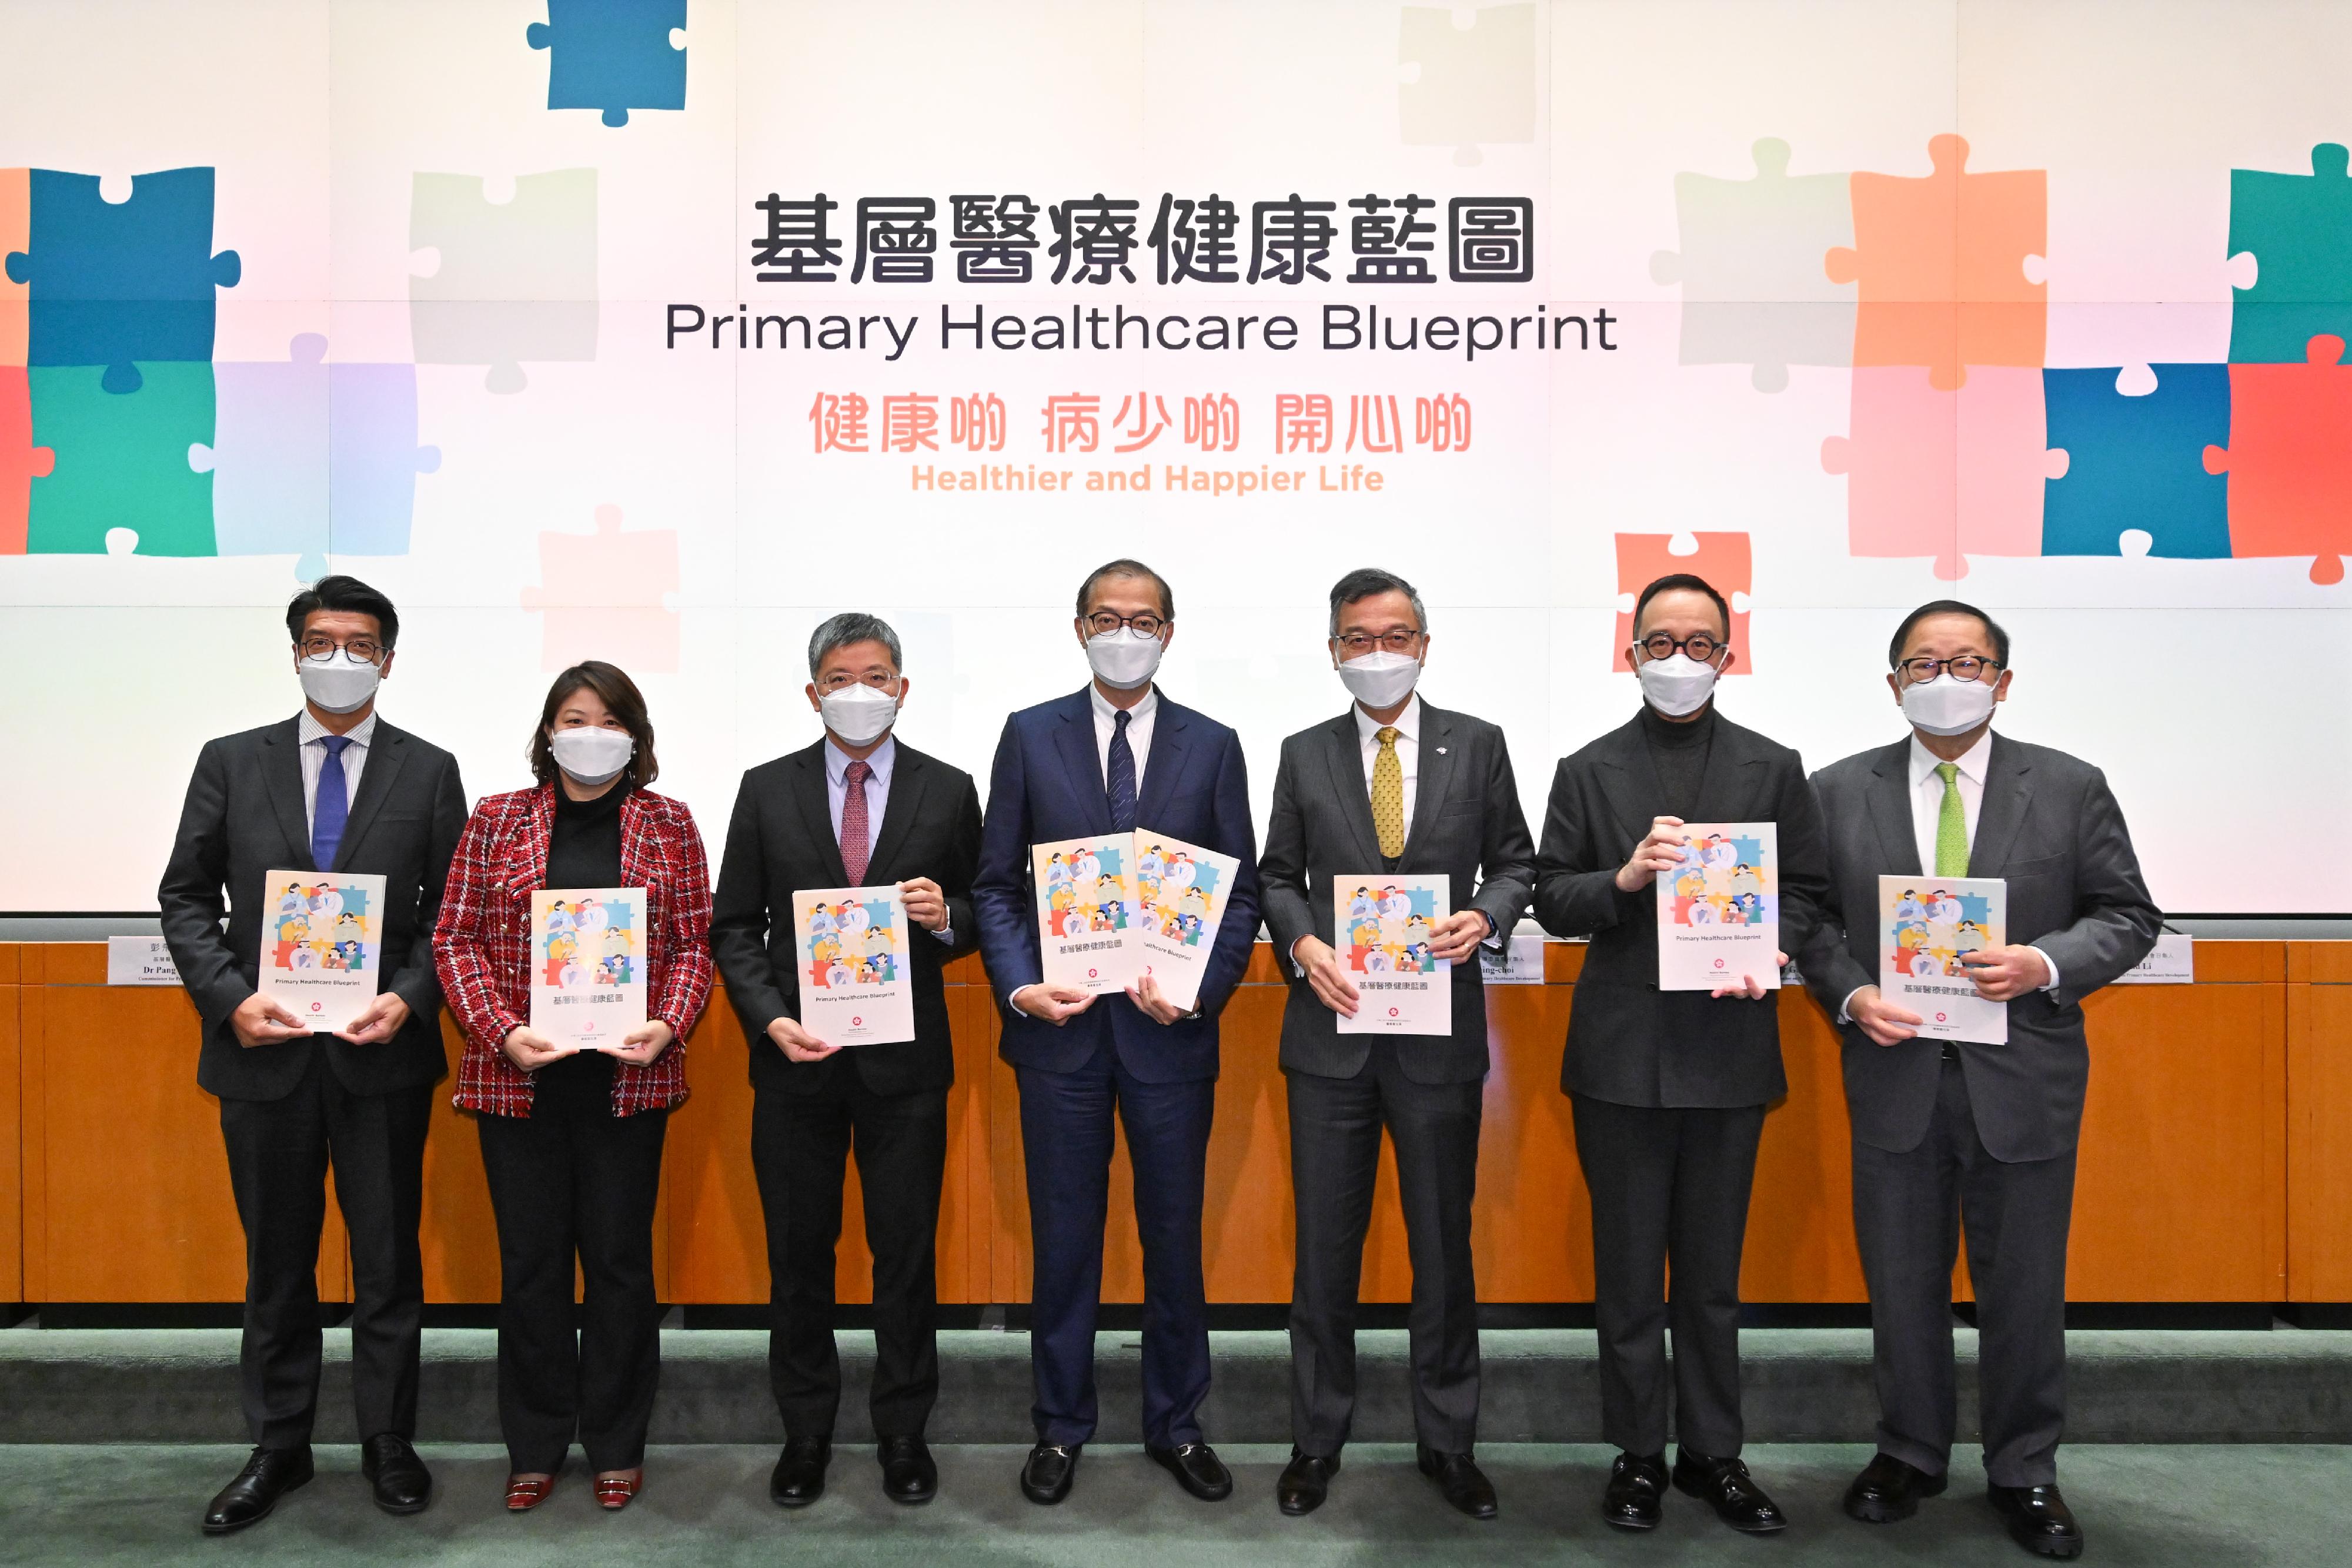 The Secretary for Health, Professor Lo Chung-mau (centre), together with the Permanent Secretary for Health, Mr Thomas Chan (third left); the Under Secretary for Health, Dr Libby Lee (second left); the Commissioner for Primary Healthcare, Dr Pang Fei-chau (first left); as well as Convenors of the Steering Committee on Primary Healthcare Development, Dr Lam Ching-choi (third right), Professor Gabriel Leung (second right), and Dr Donald Li (first right), unveiled the Primary Healthcare Blueprint at a press conference today (December 19).